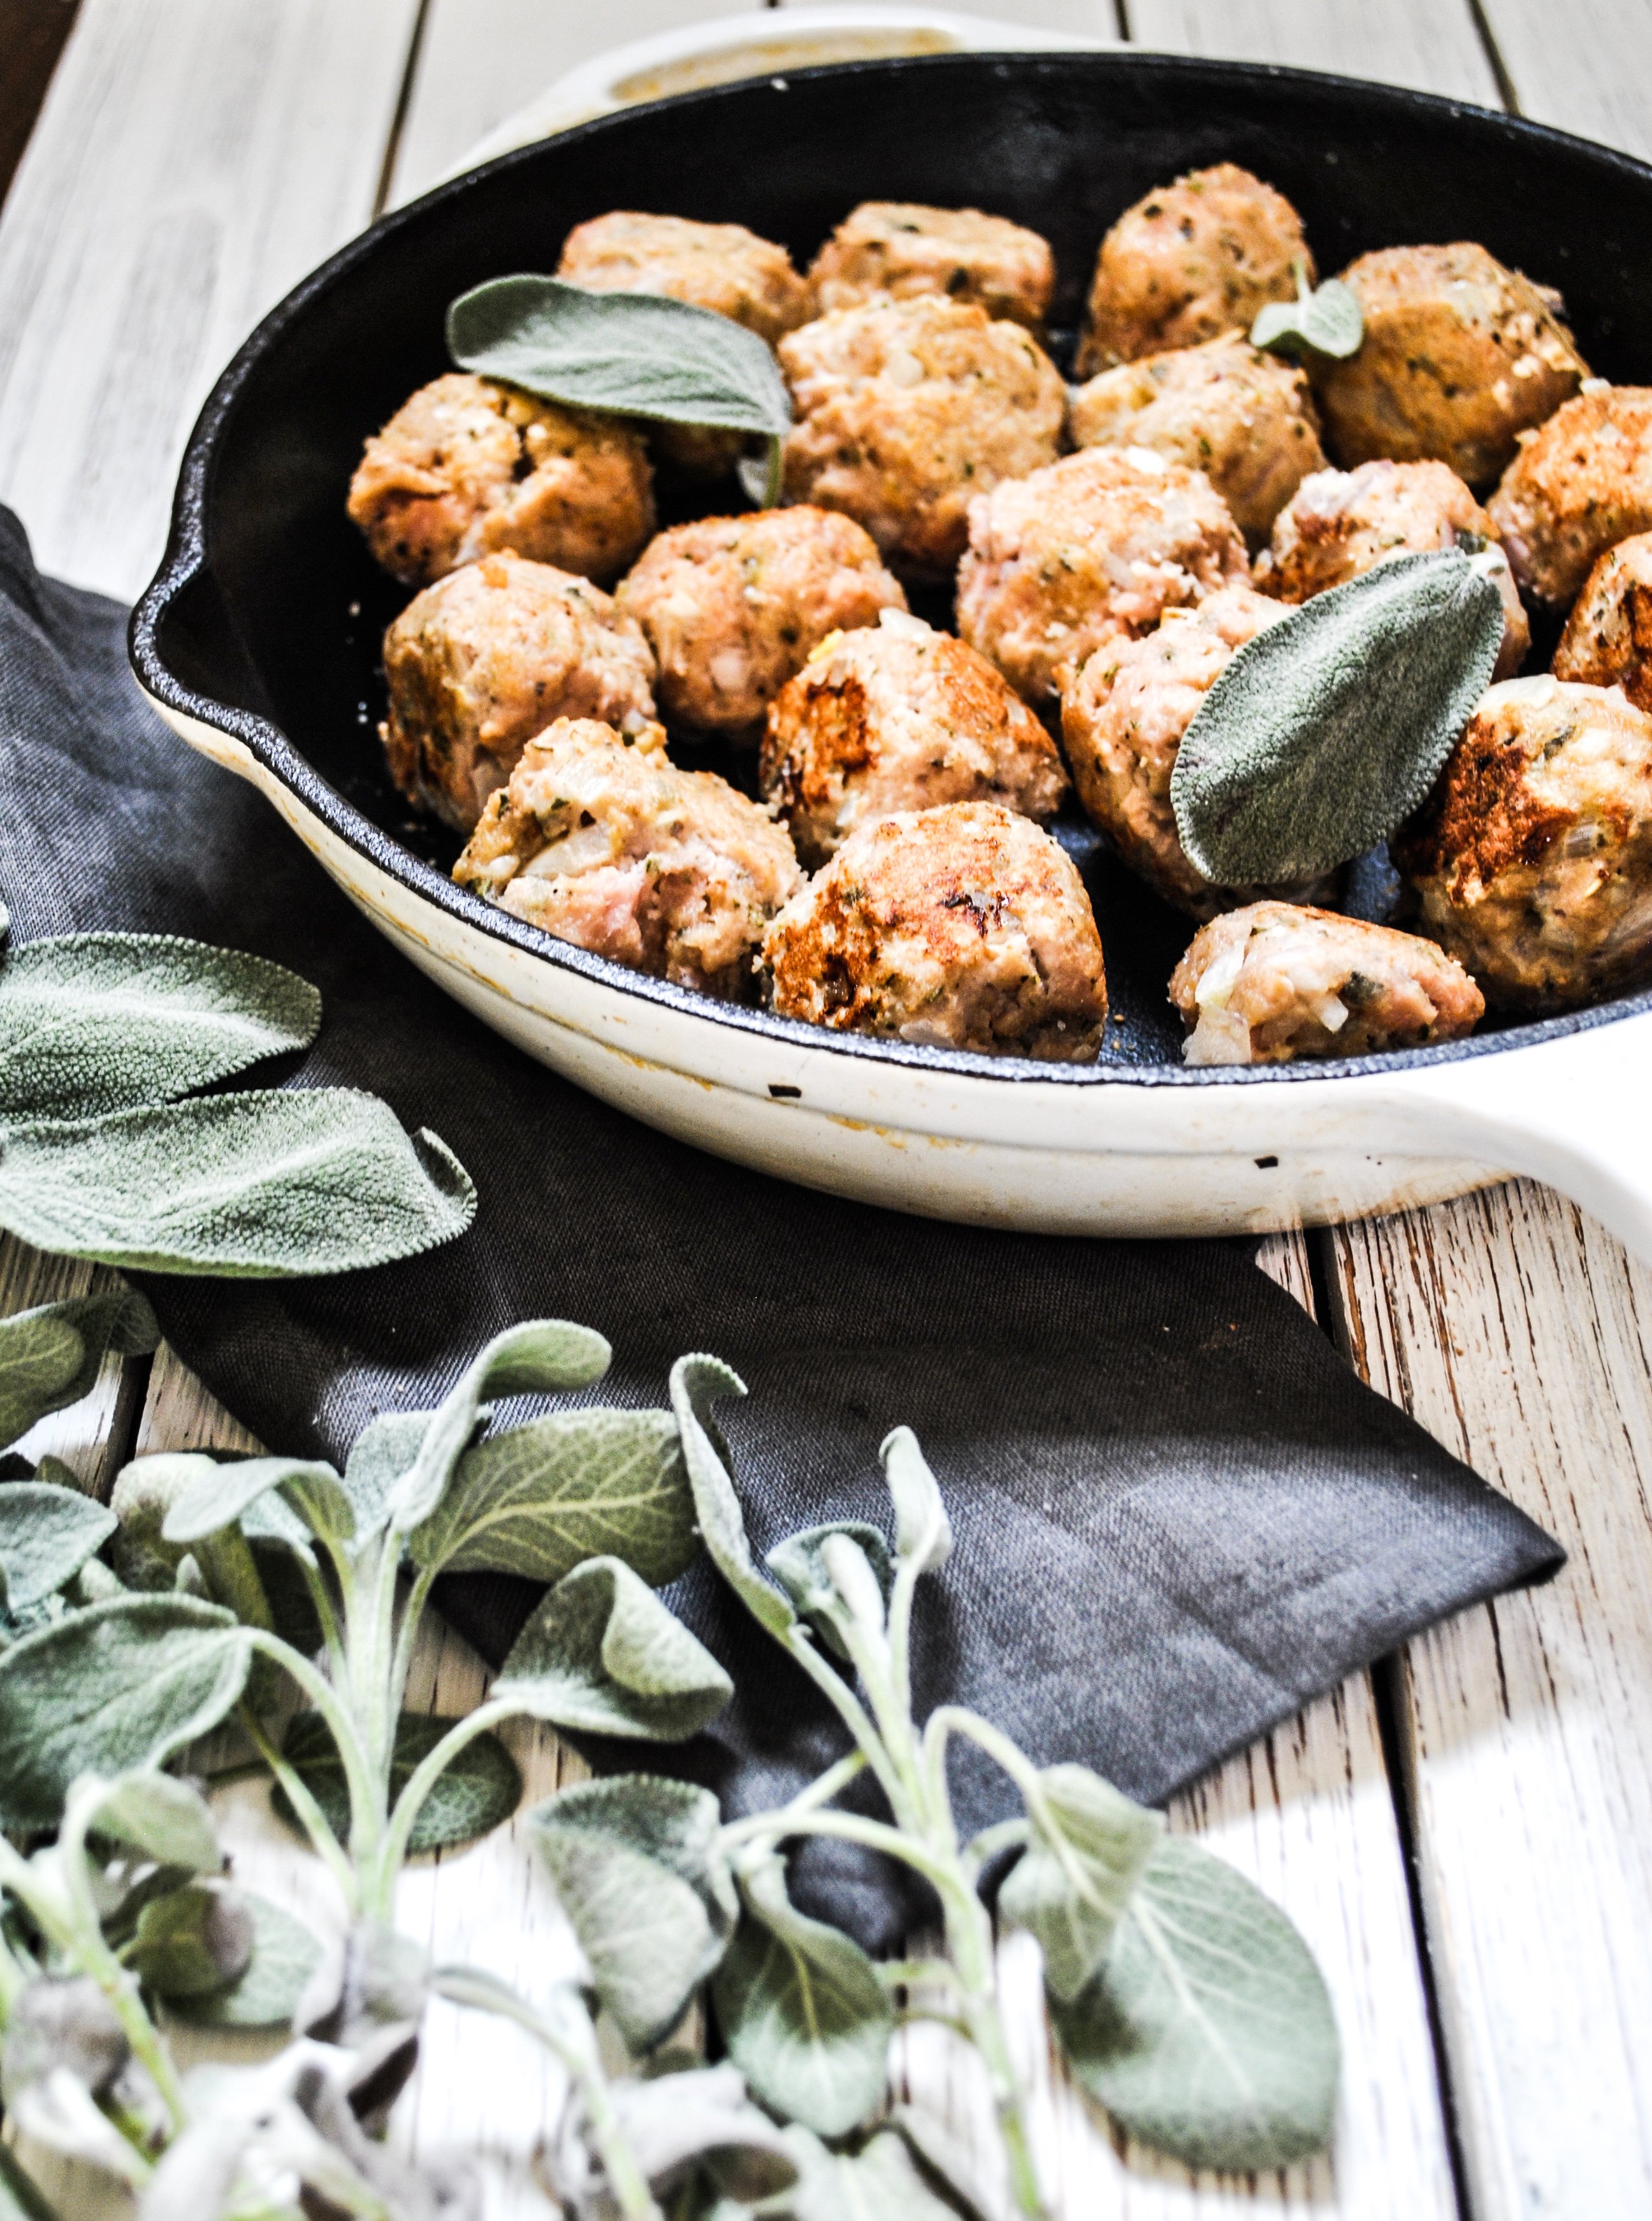 Lifestyle Blogger Chocolate and Lace shares her recipe for Turkey and Sage Meatballs. 